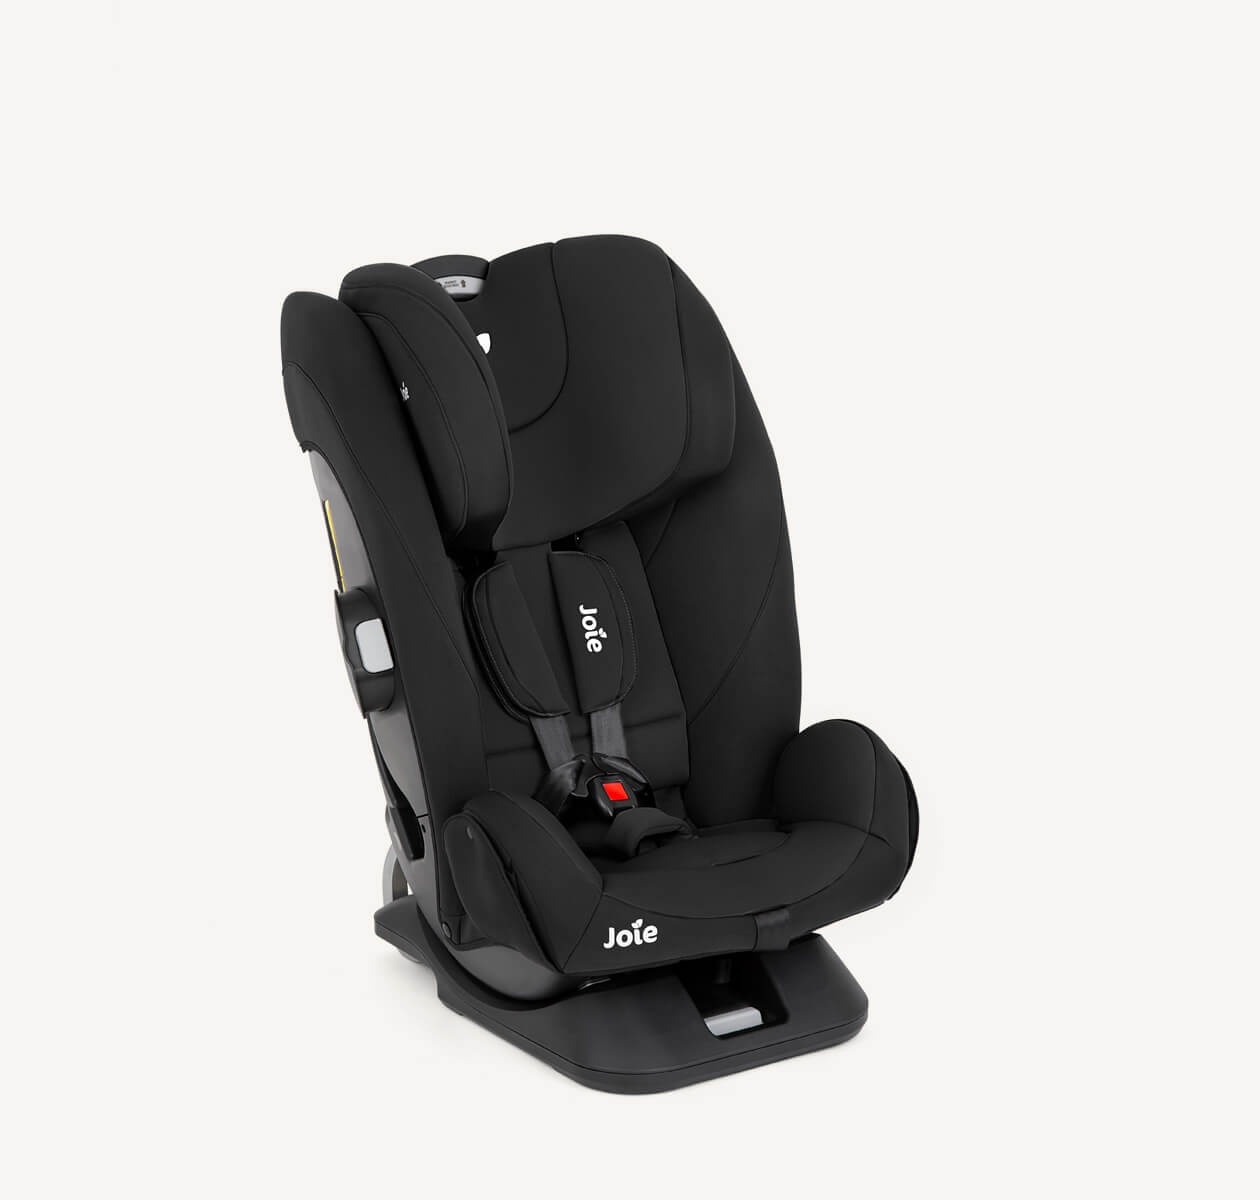  Joie Centra toddler car seat in black from a right angle.